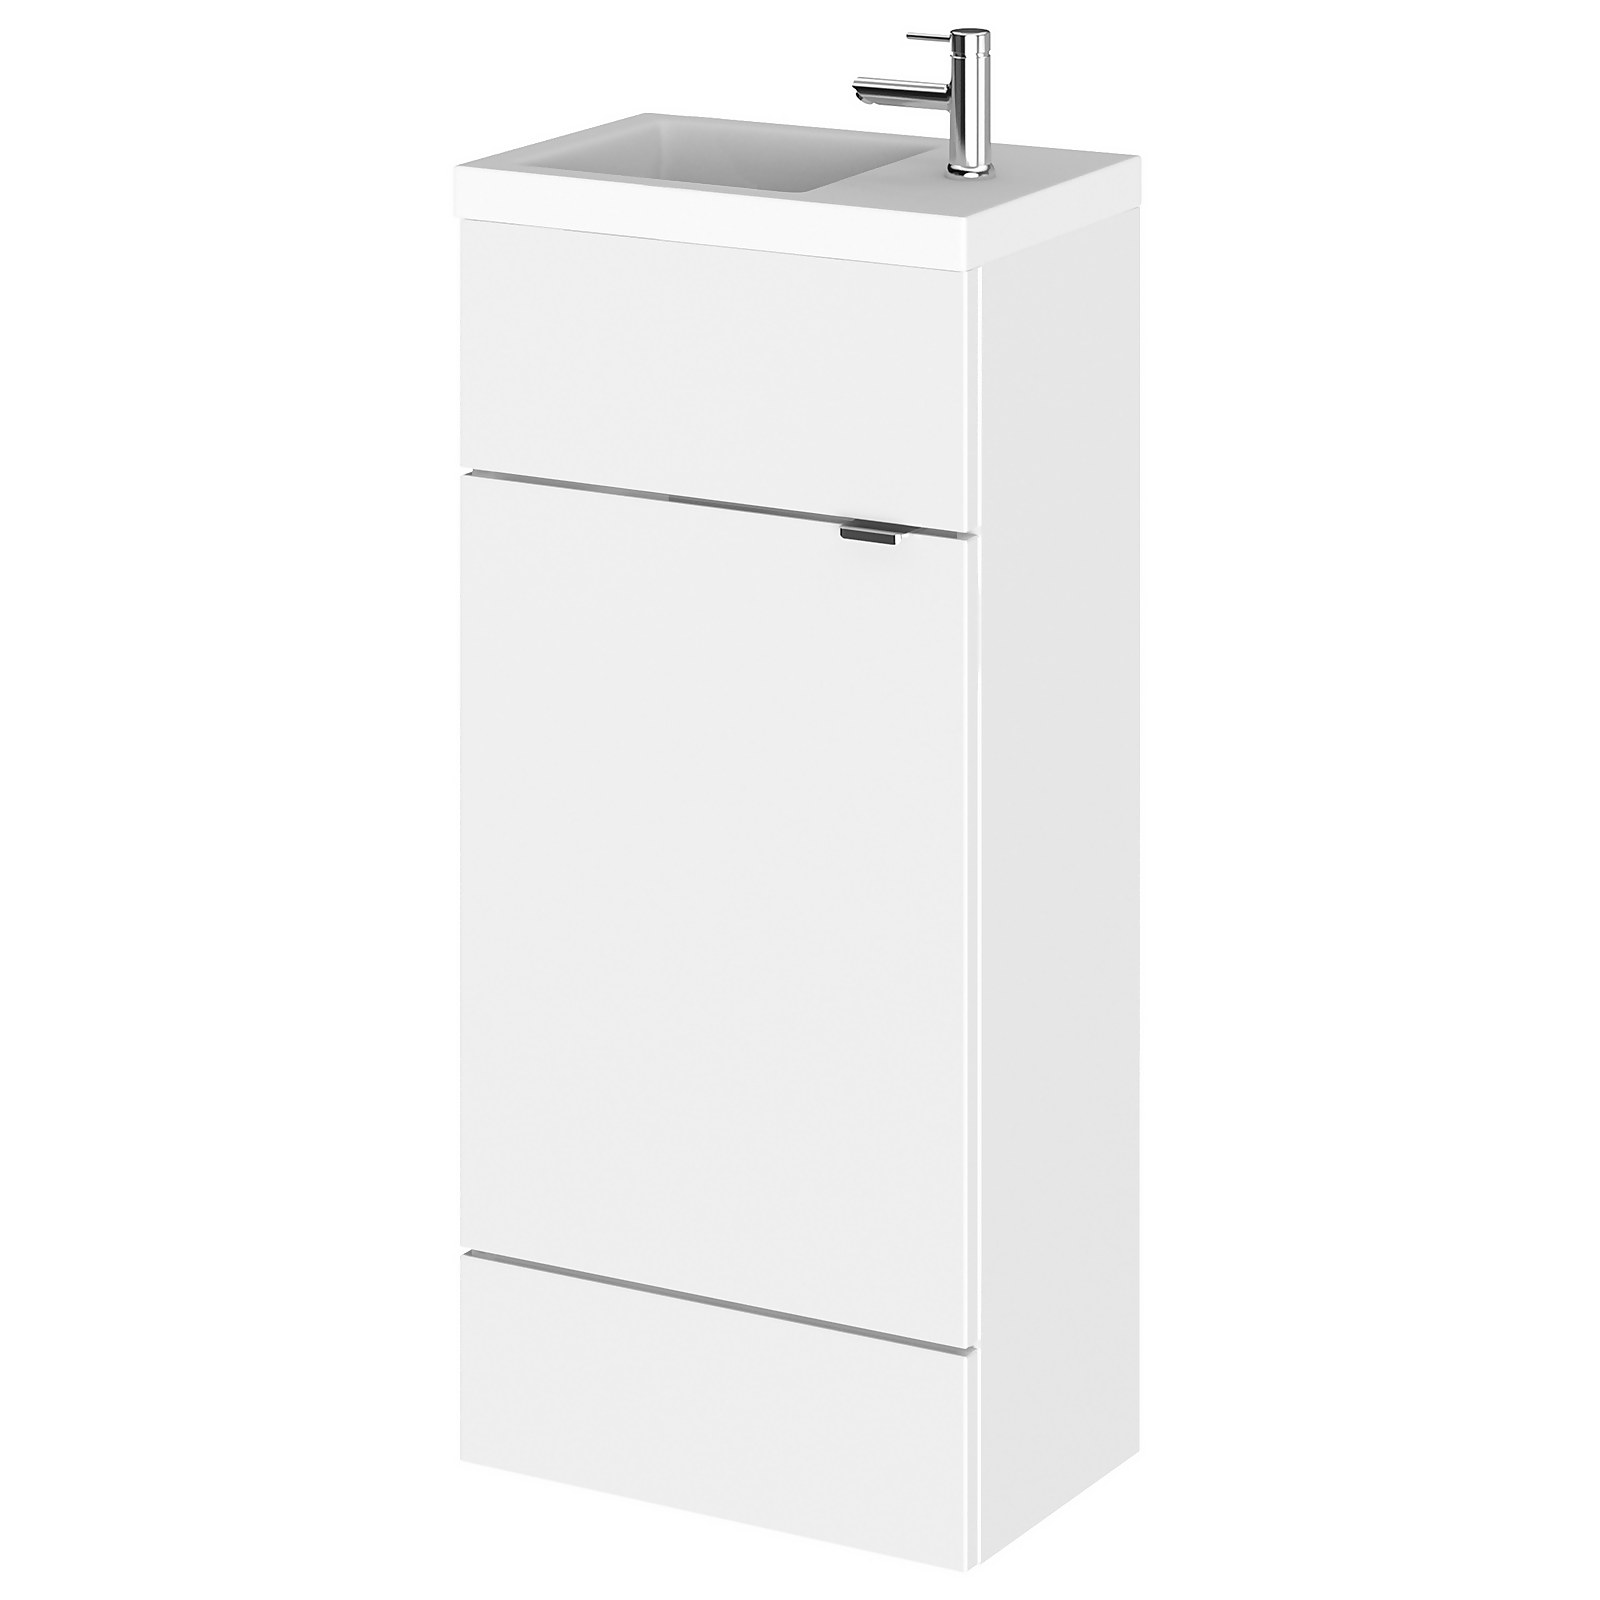 Balterley Dynamic 400mm Compact Vanity Unit with Basin - Gloss White